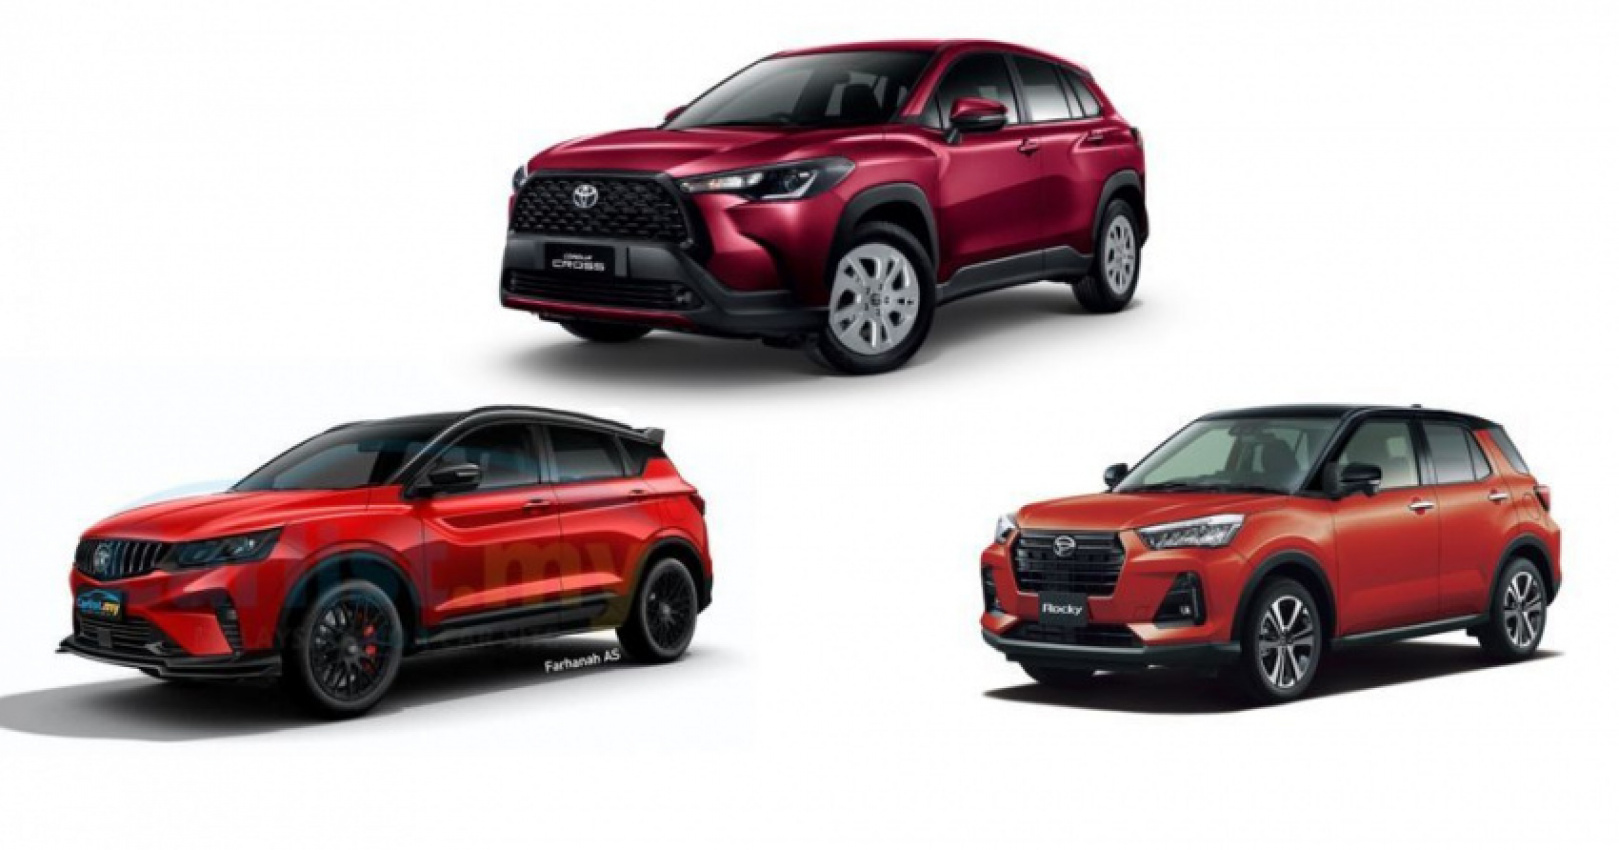 autos, cars, reviews, toyota, corolla cross, d55l, insights, perodua, perodua suv, proton, proton x50, toyota corolla cross, x50, x50 malaysia, enter the toyota corolla cross, another hotly anticipated suv like the x50 and d55l